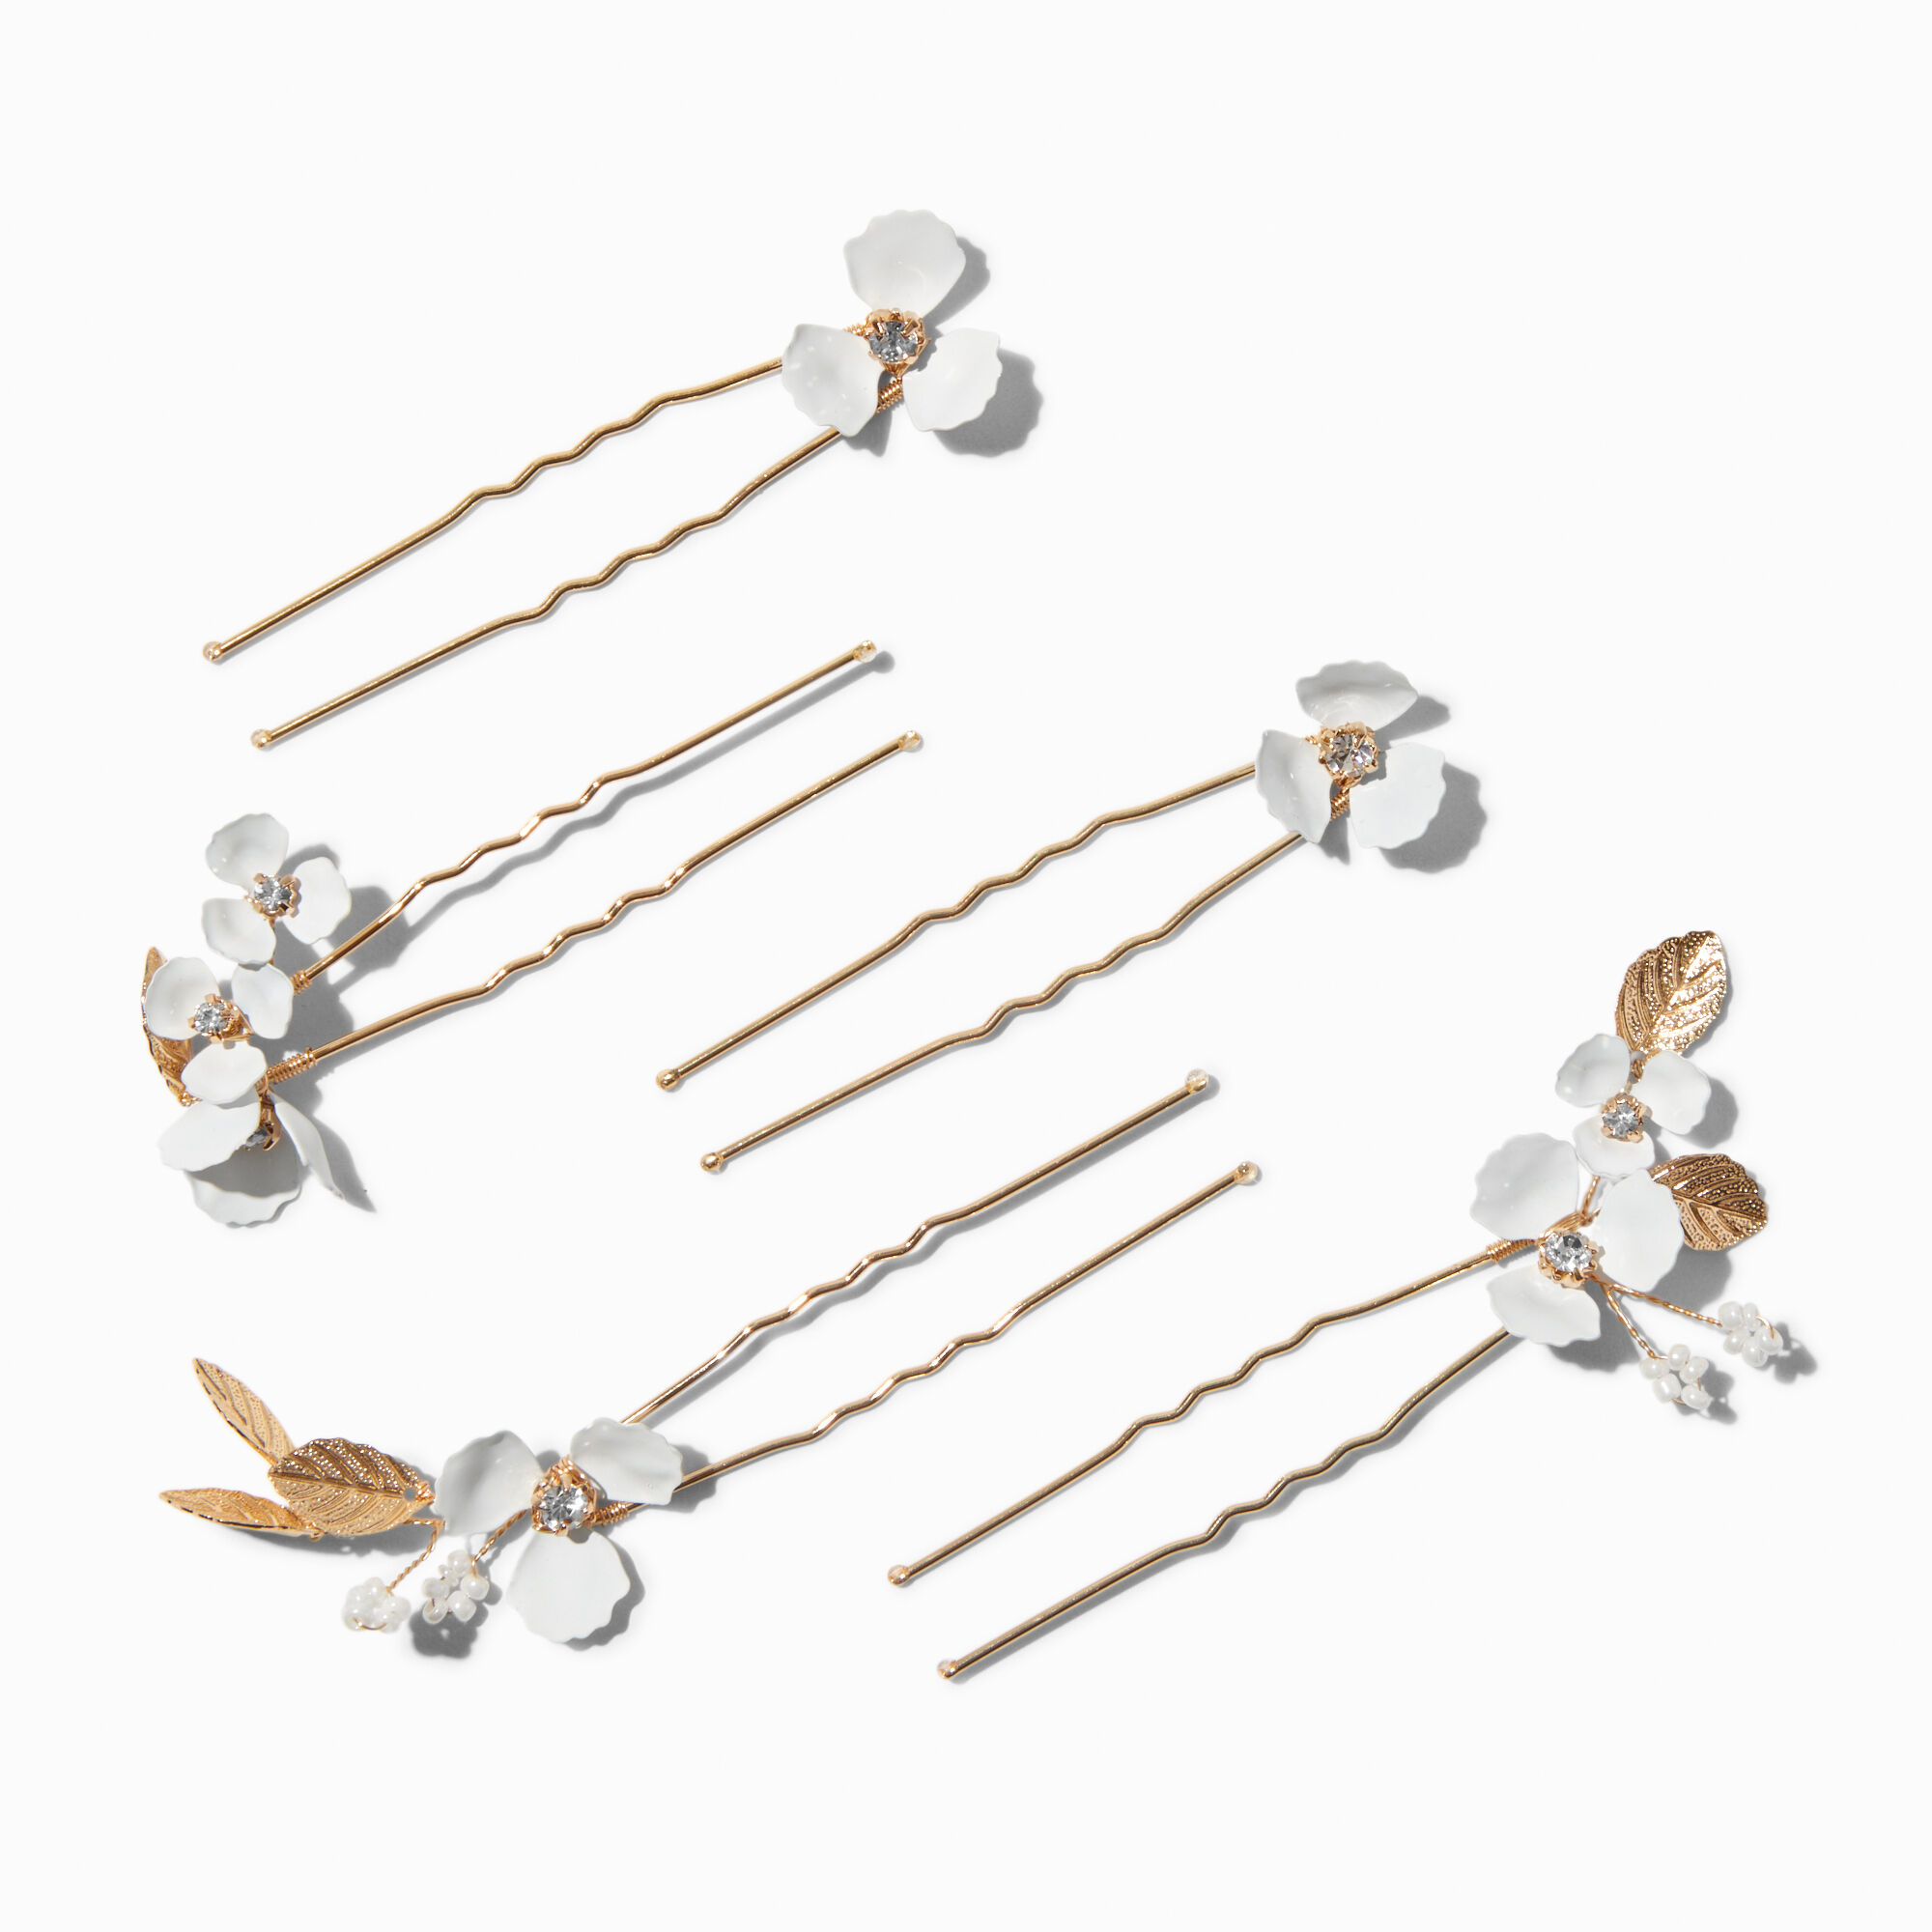 View Claires Flower GoldTone Hair Pins 6 Pack White information